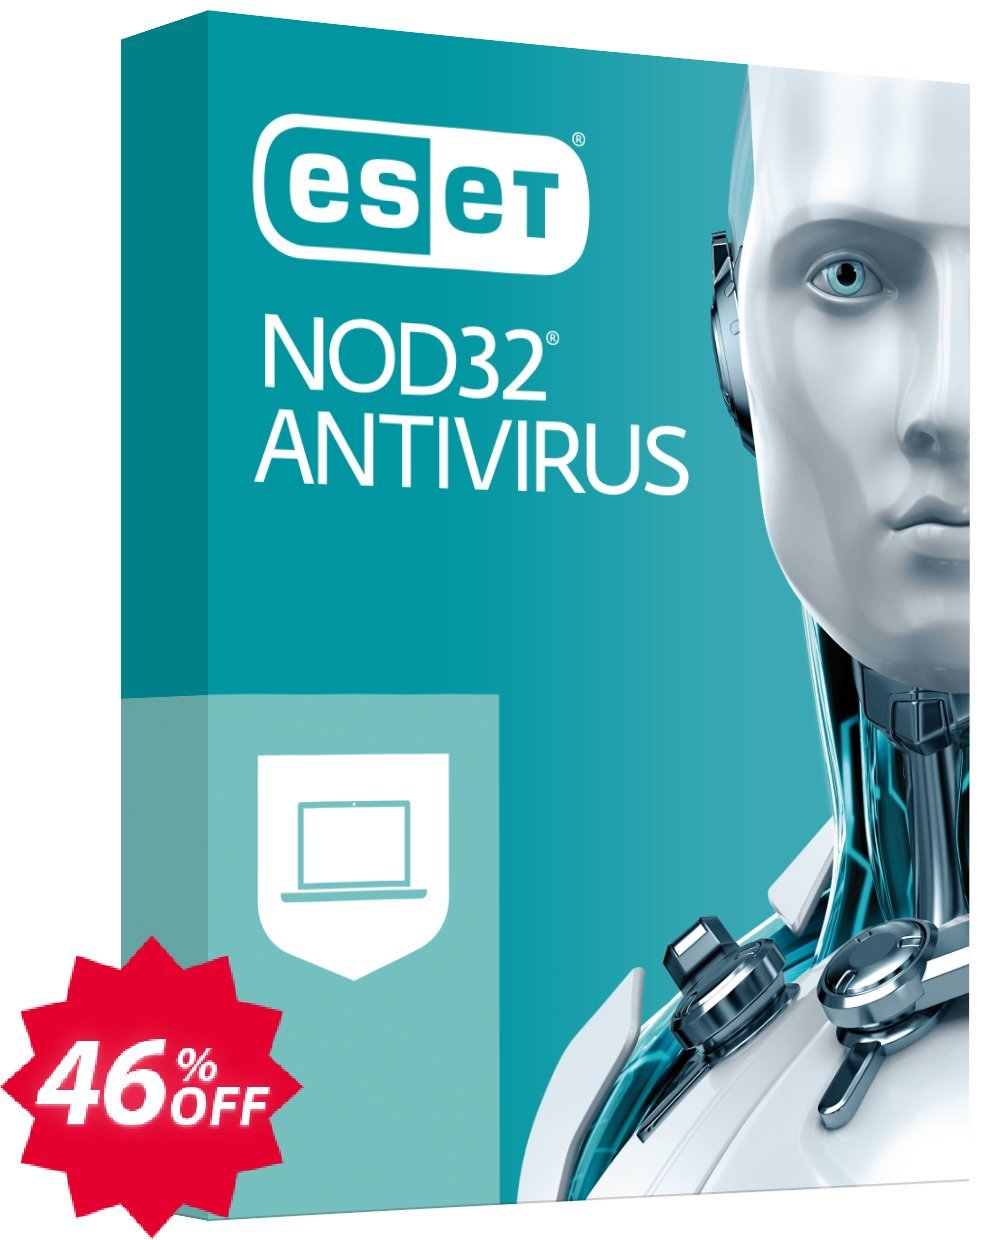 ESET NOD32 Antivirus - Renew Yearly 4 Devices Coupon code 46% discount 